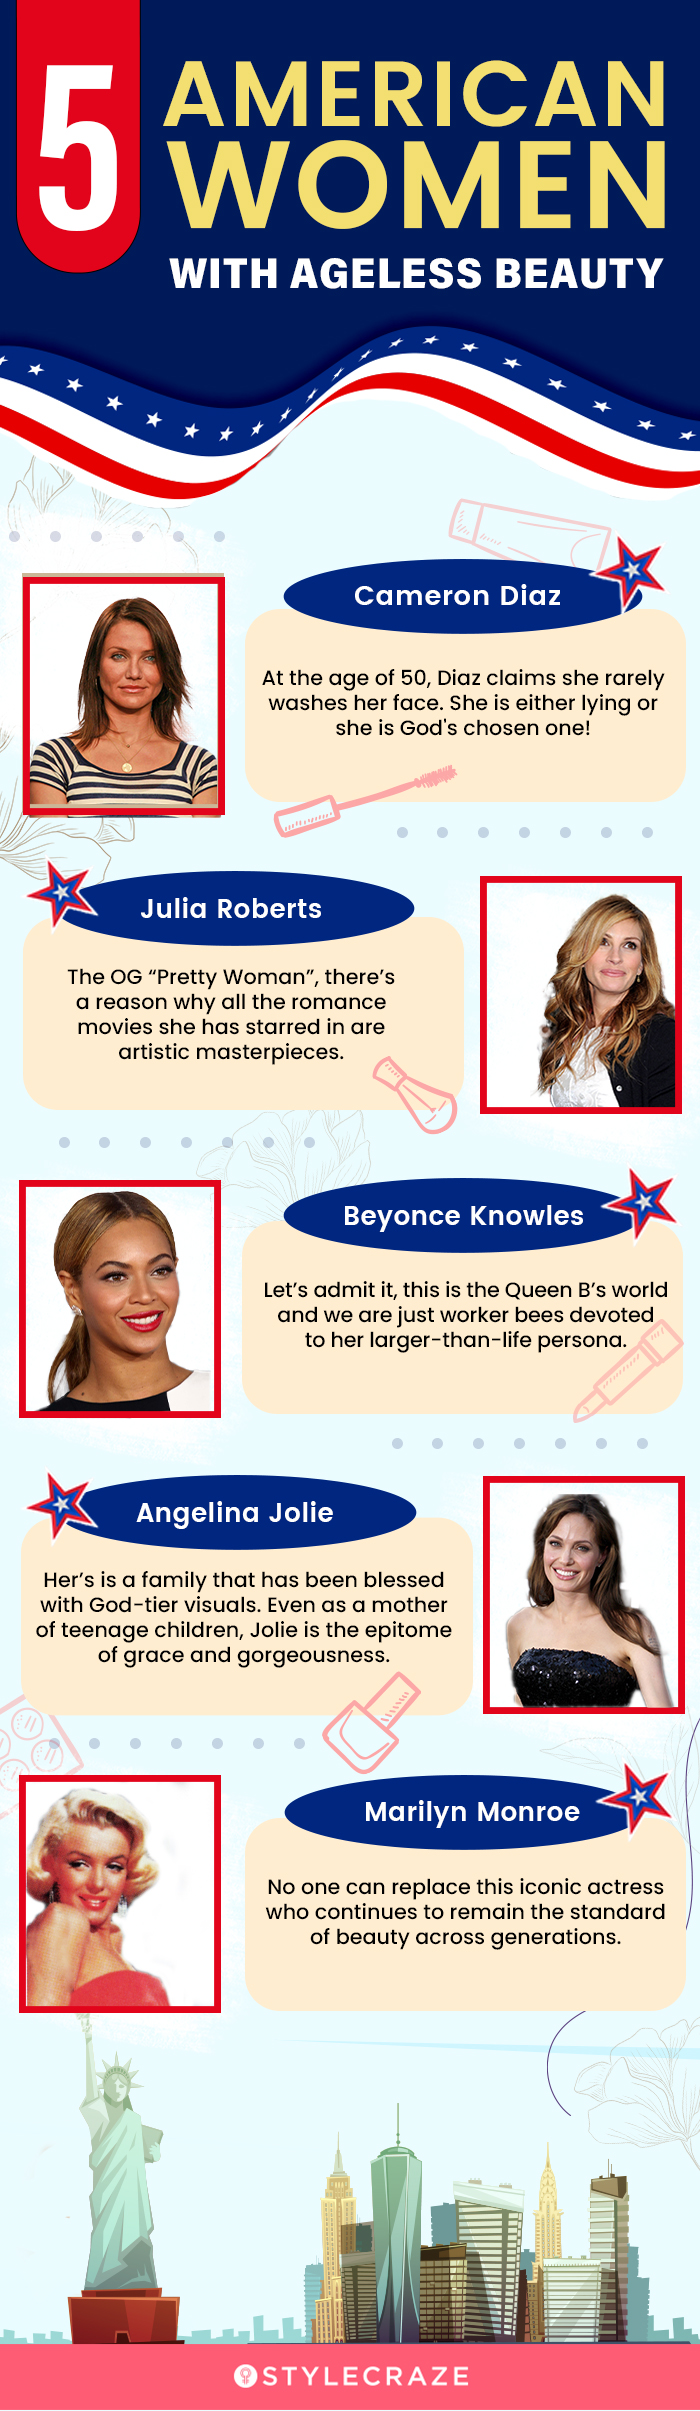 5 american women with ageless beauty [infographic]